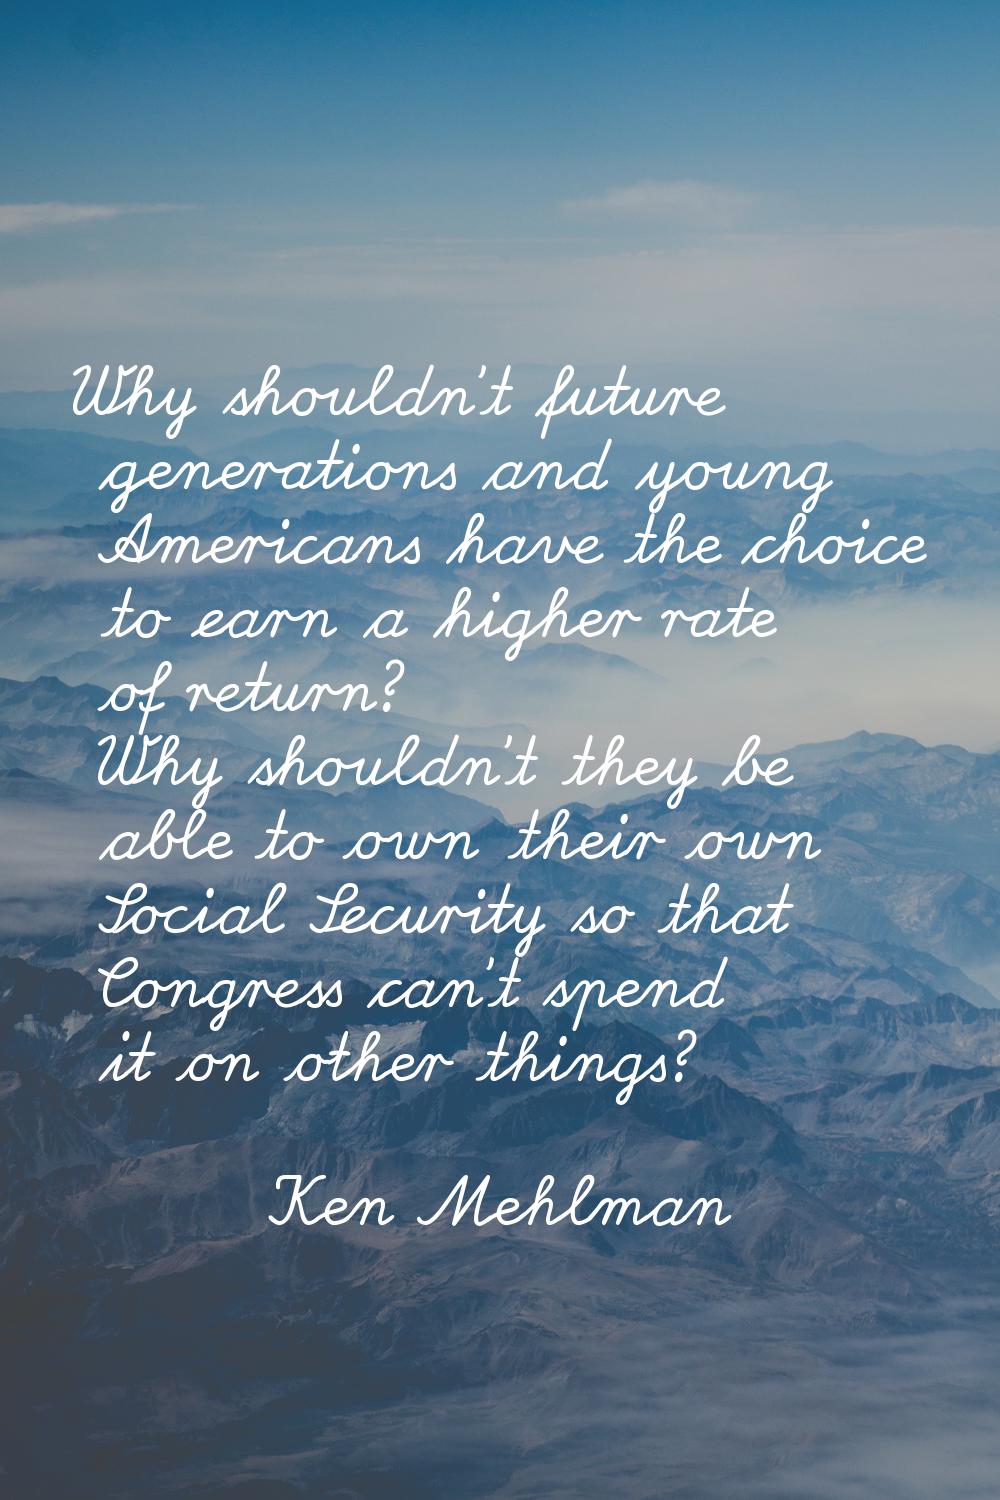 Why shouldn't future generations and young Americans have the choice to earn a higher rate of retur